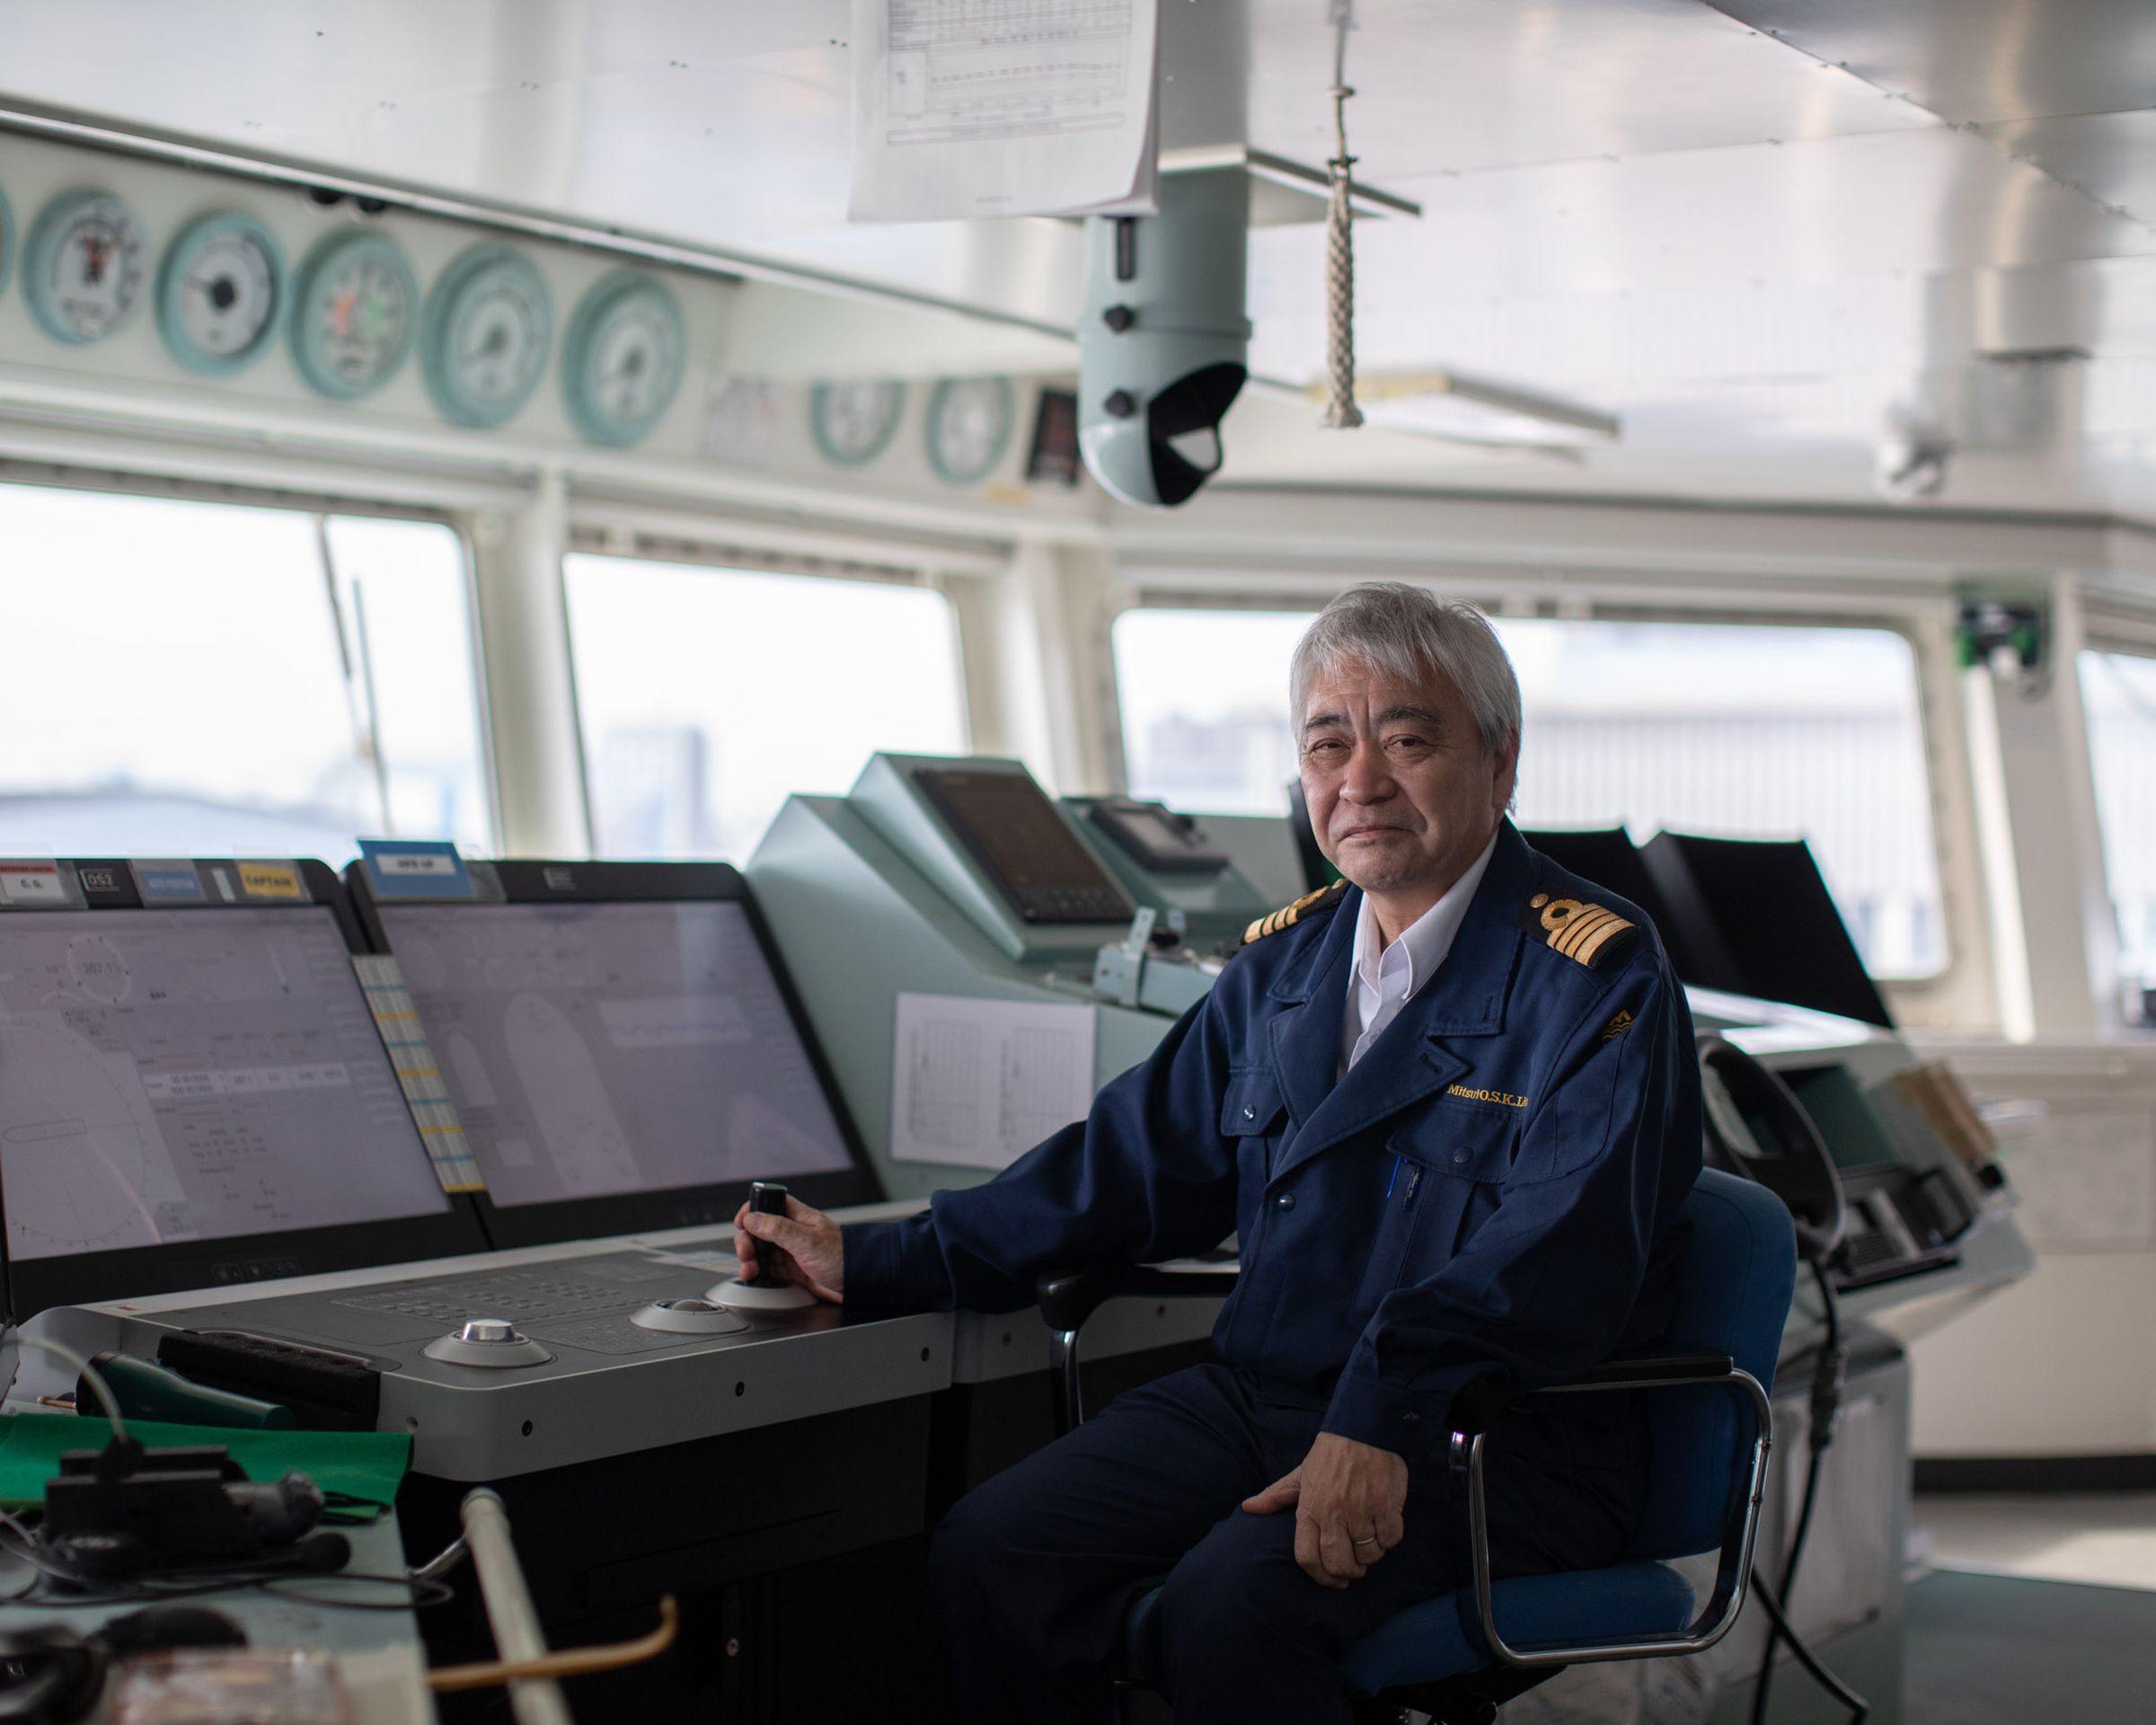 Captain Shoichi Suzuki sits in front of the control panels in the bridge of the Ocean Link.